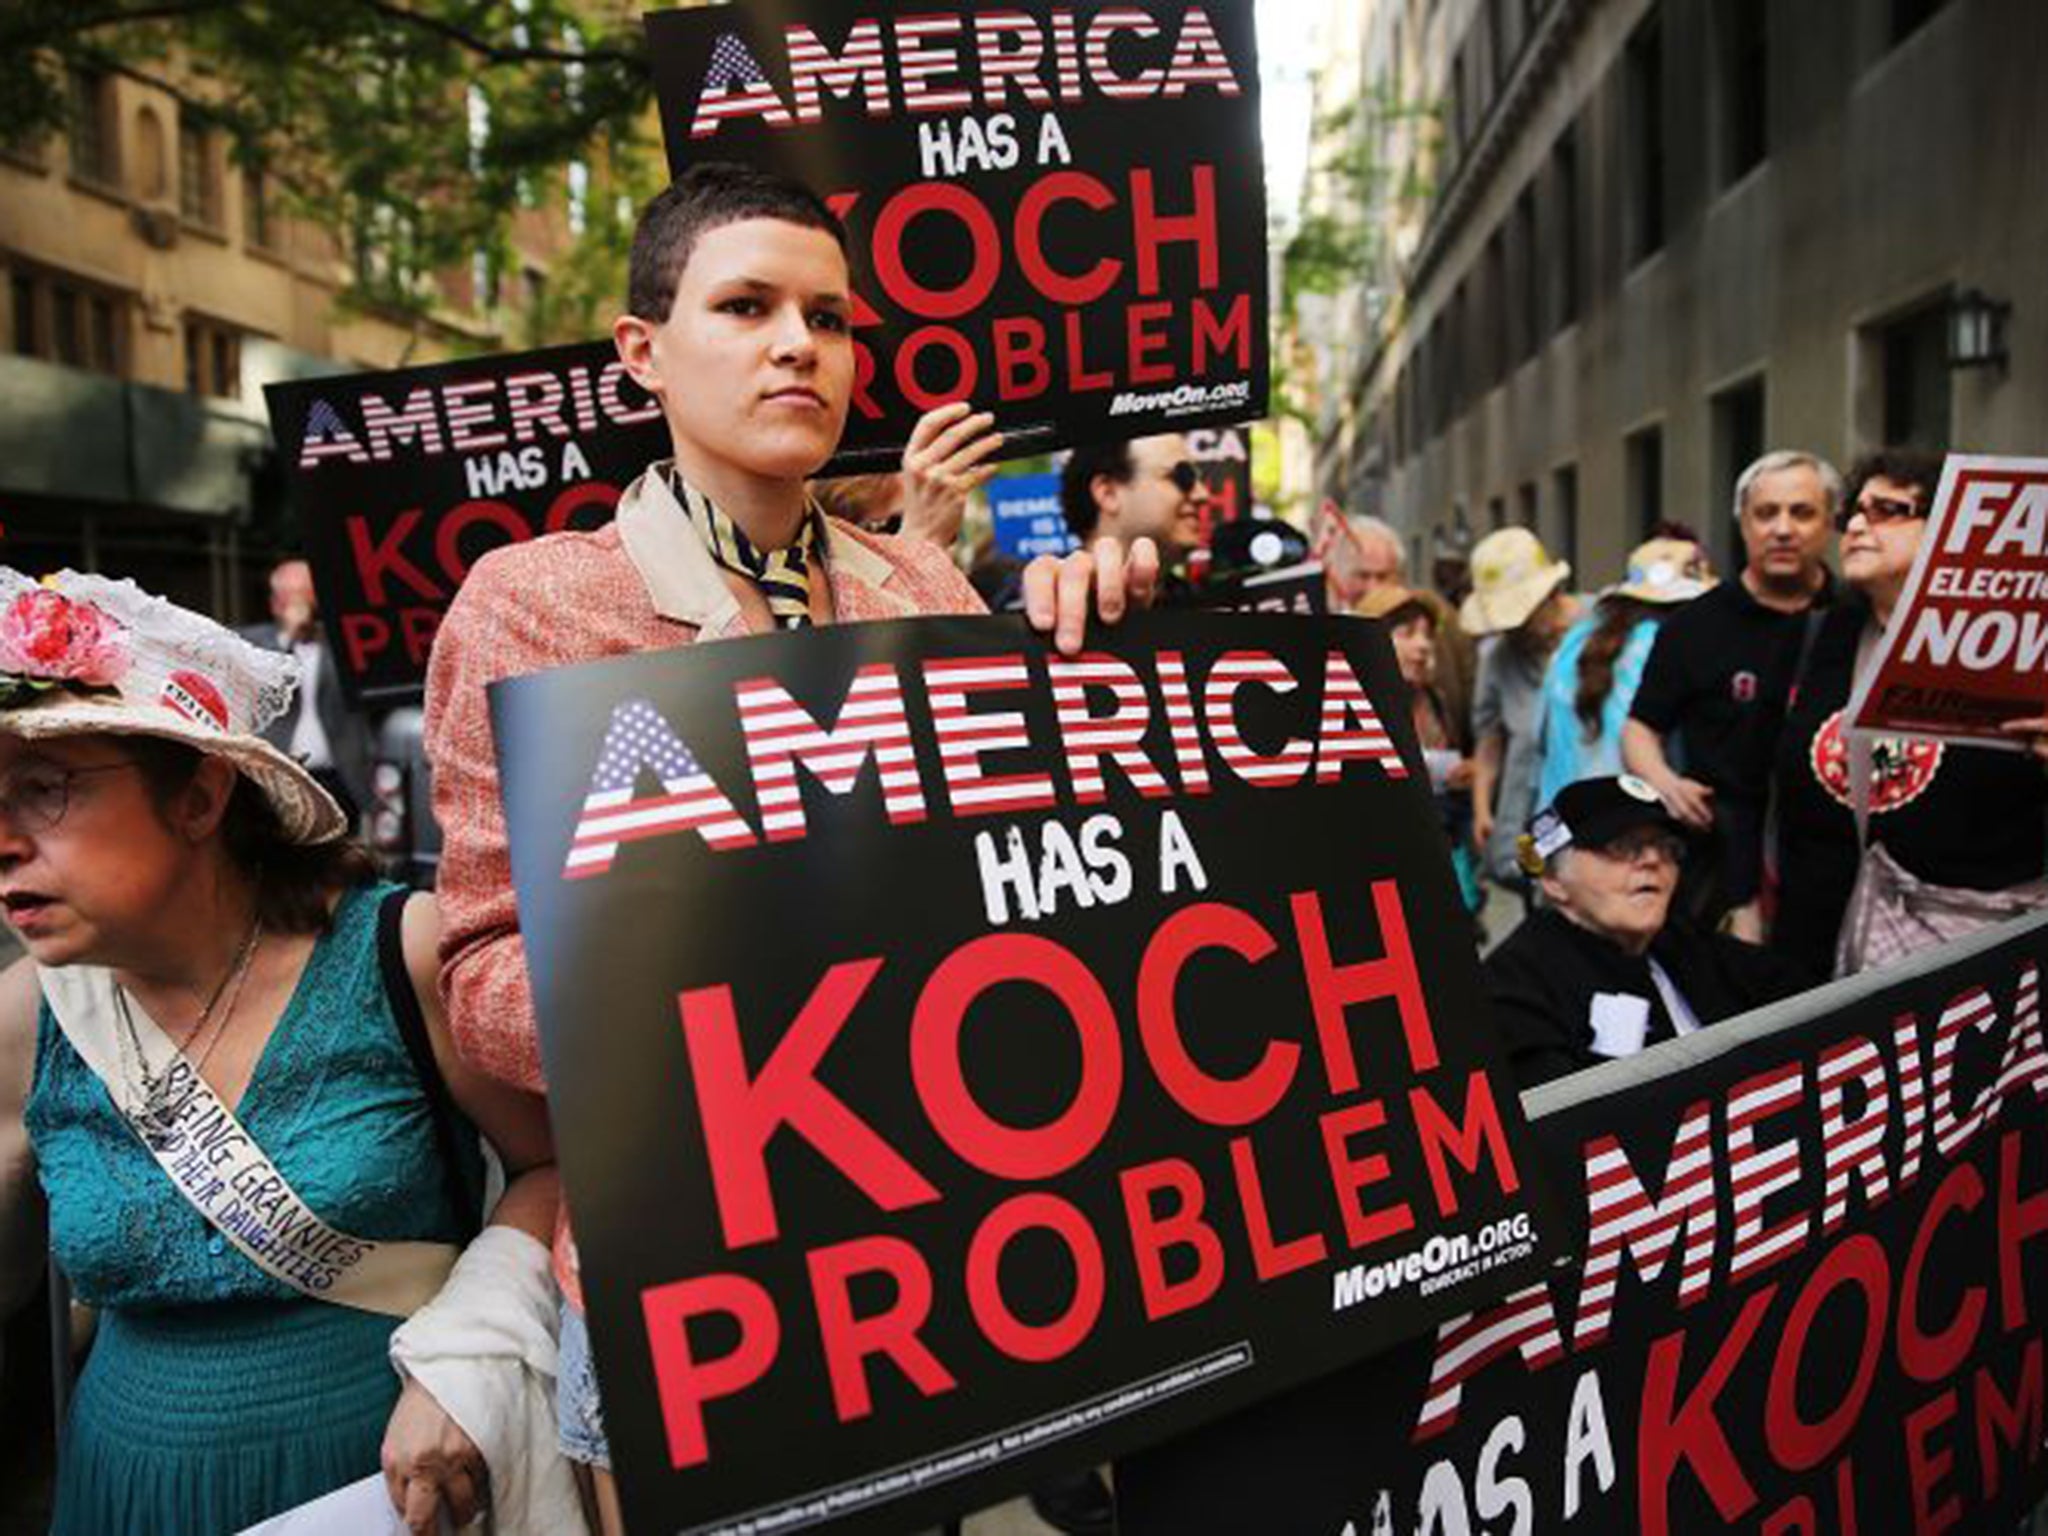 Republican campaign donations by billionaires David and Charles Koch led to protests in New York by critics who accuse them of skewing the political playing field